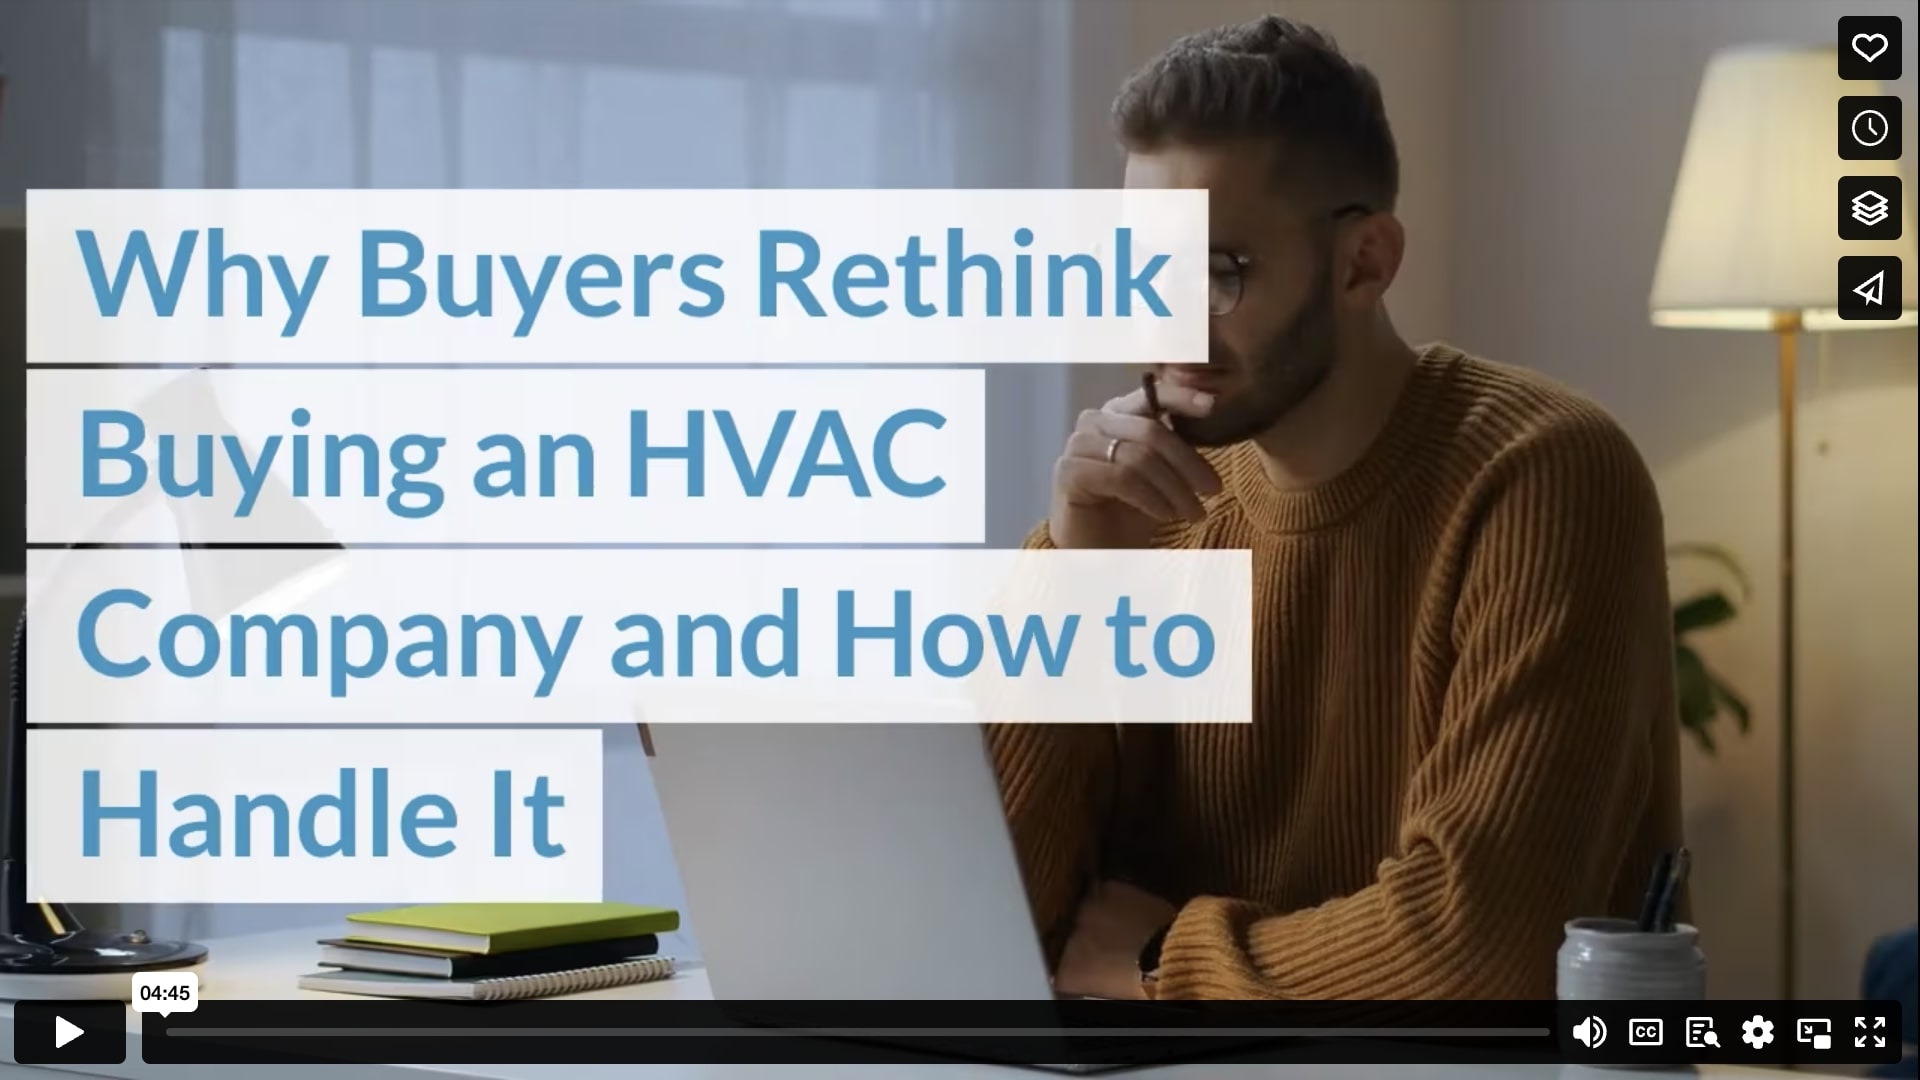 Why Buyers Rethink Buying an HVAC Company and How to Handle It